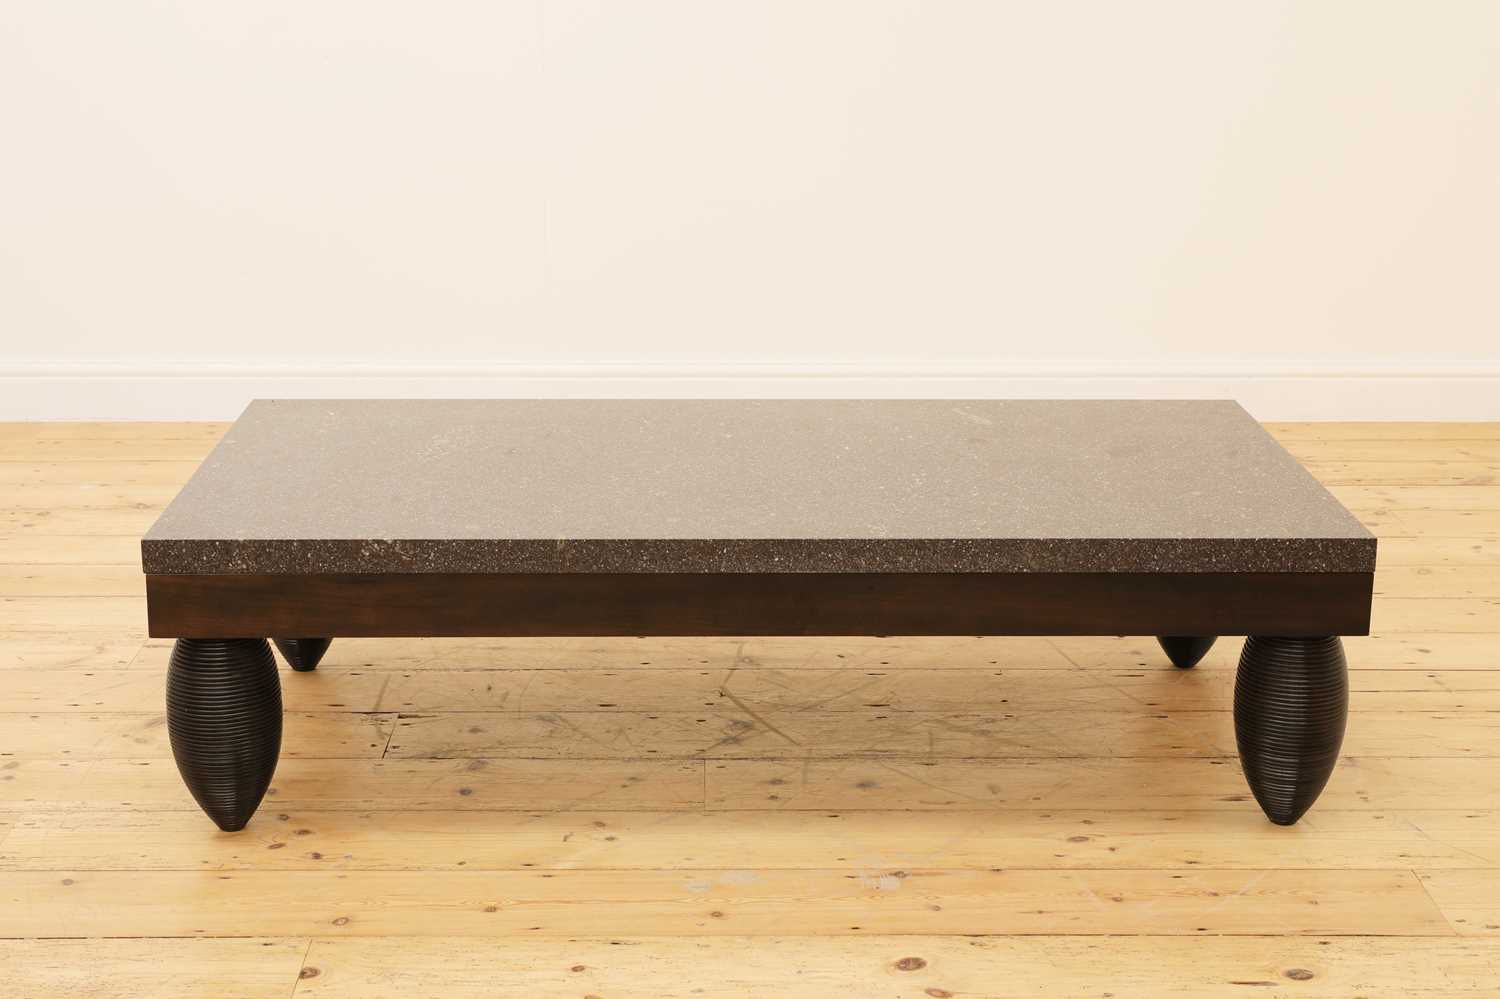 Lot 256 - A porphyry-topped rectangular low table